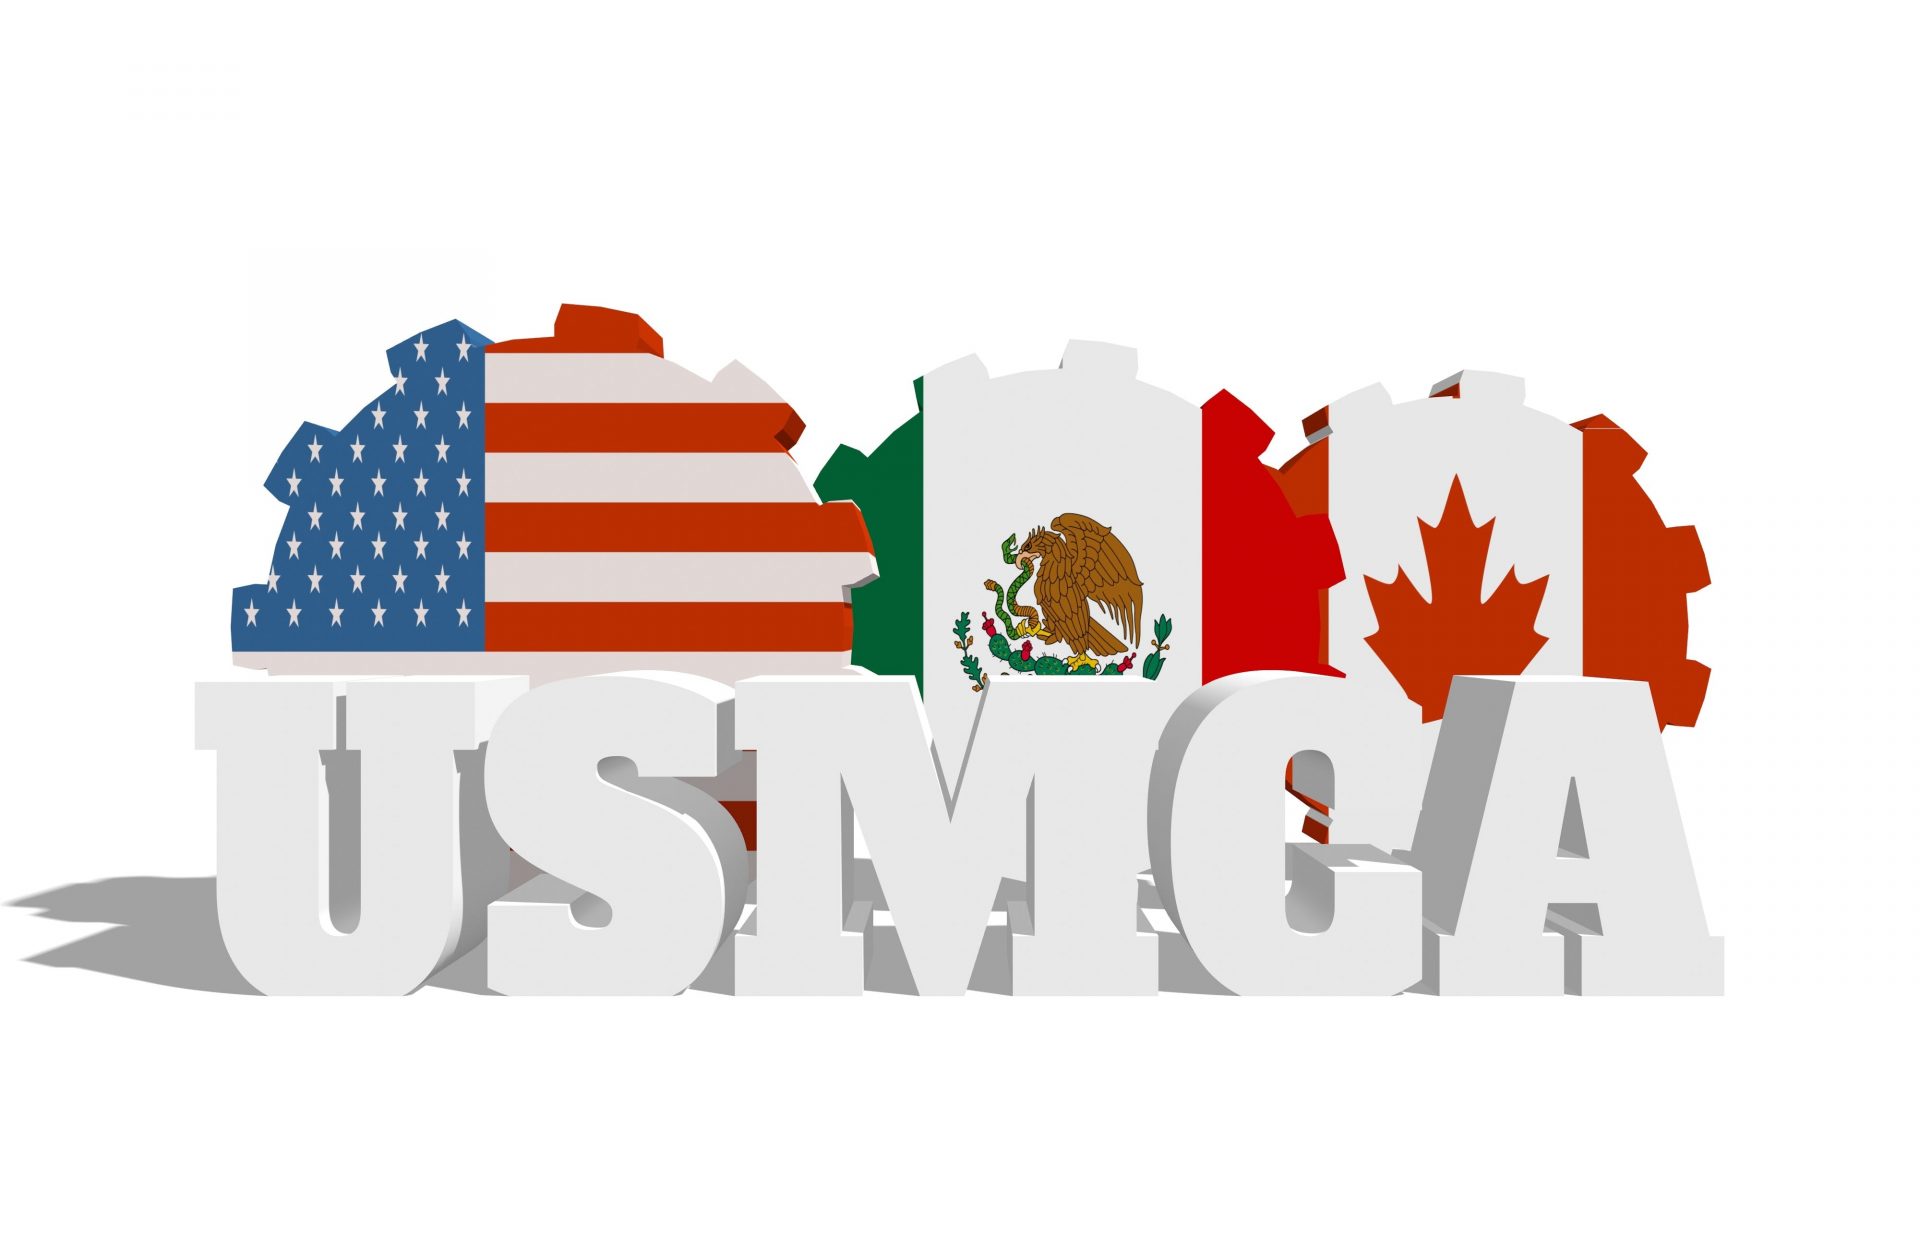 The USMCA trade agreement will begin on July 1st 2020